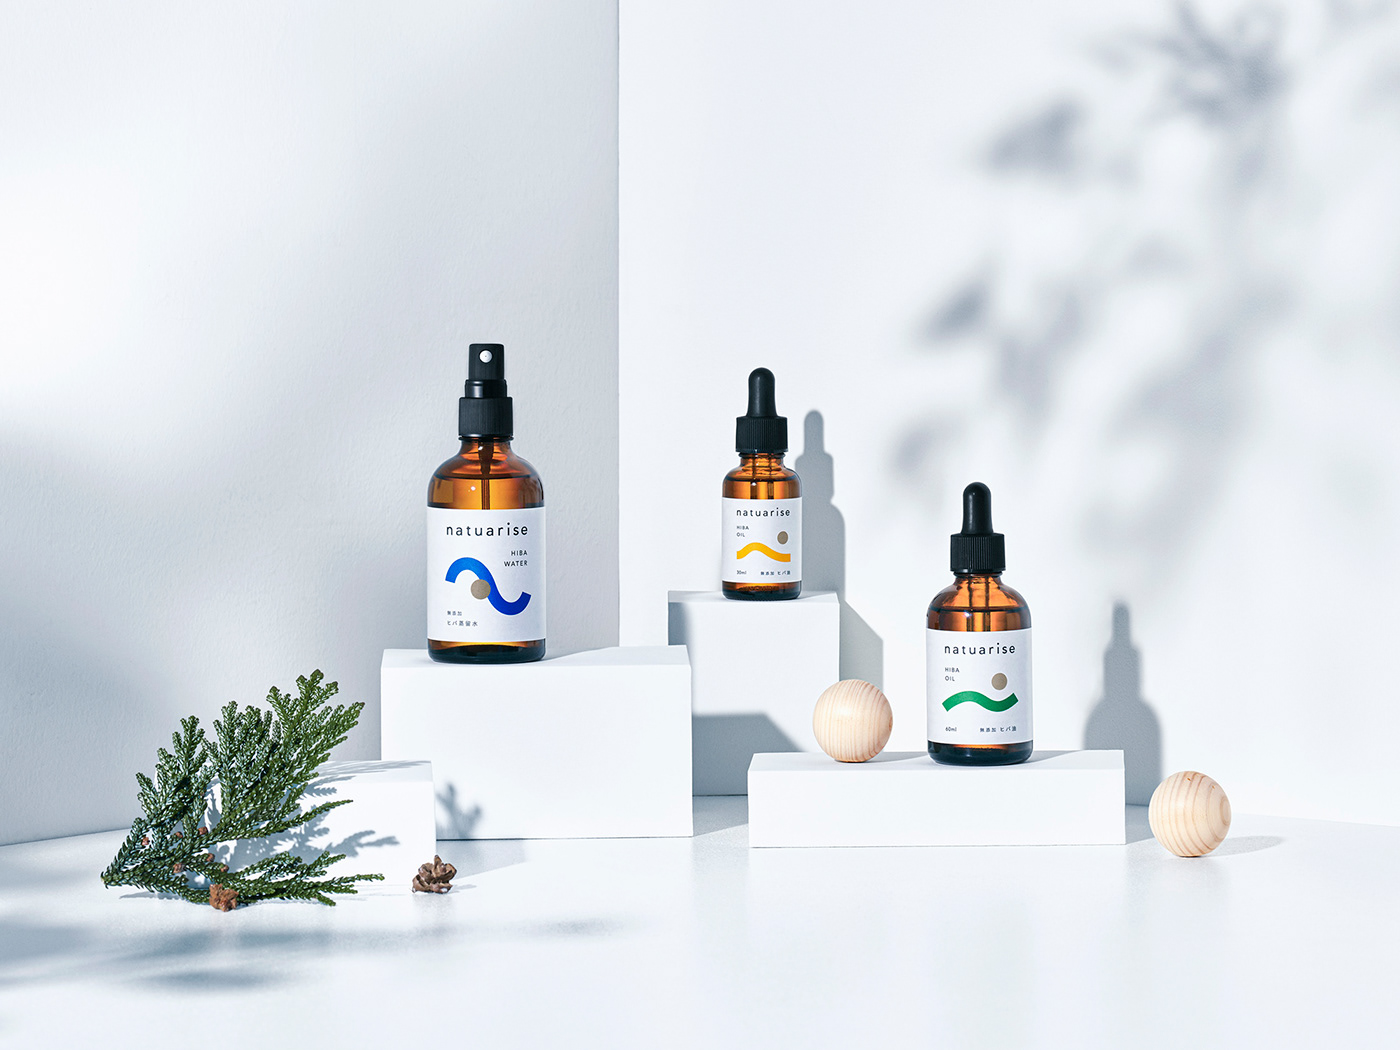 blue cosmetics green lifestyle Nature oil Packaging visual identity yellow 自然